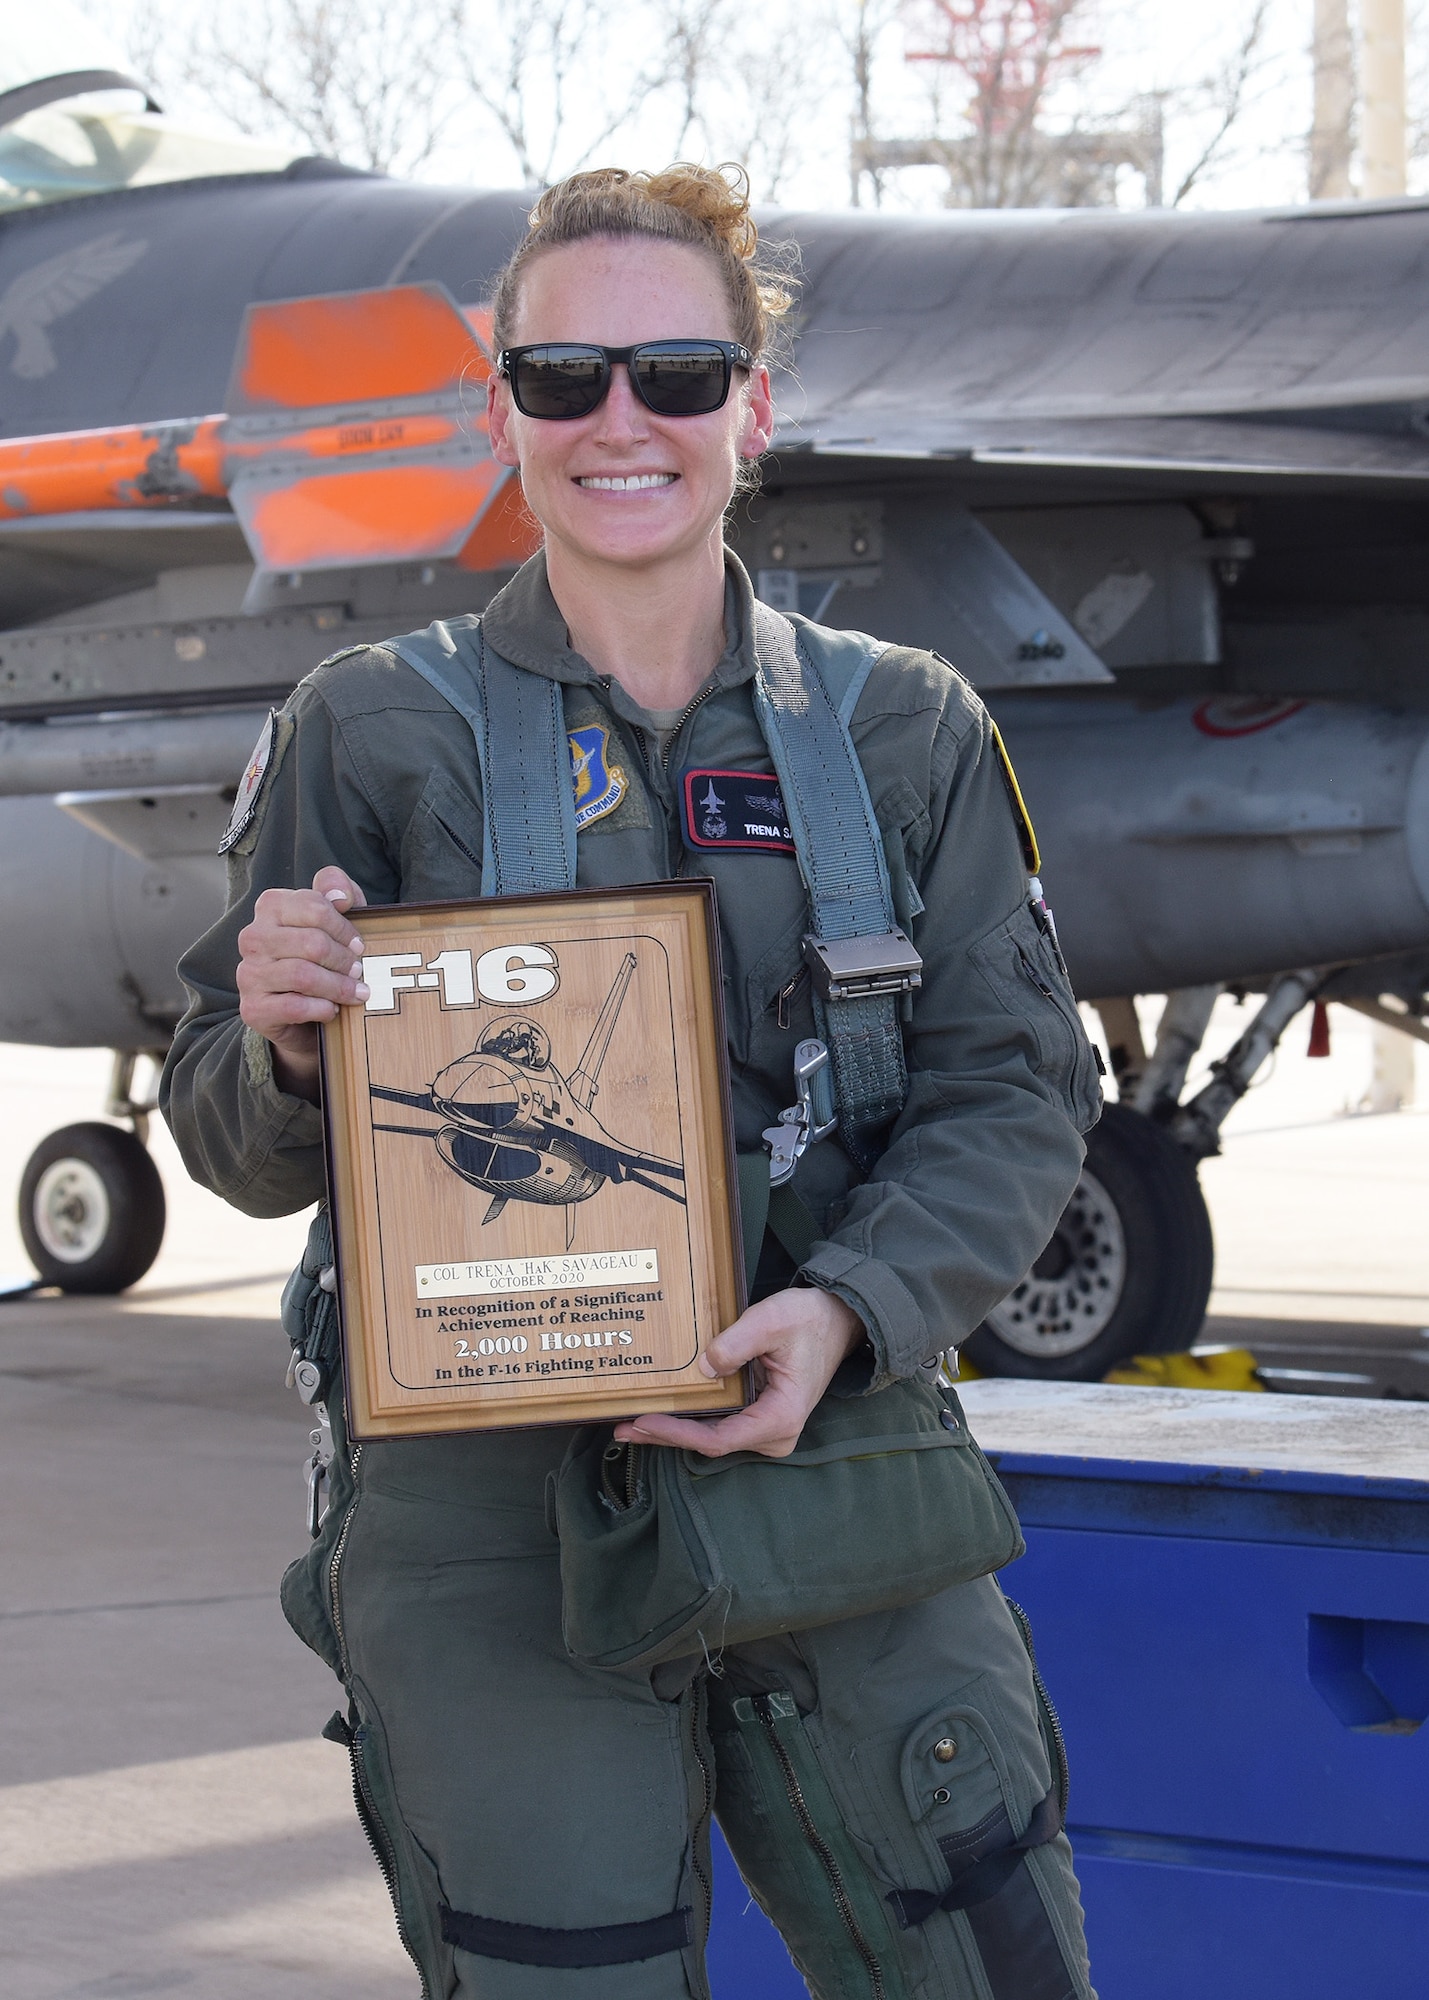 – Col. Trena “HaK” Savageau is known for breaking barriers and setting high expectations as the first female commander of the 944th Operations Group at Luke Air Force Base, Arizona. On January 13th, she crushed another goal as she flew past her two thousandth flying hour in the F-16C Fighting Falcon and became the first female in the U.S. Air Force Reserve to achieve this milestone.